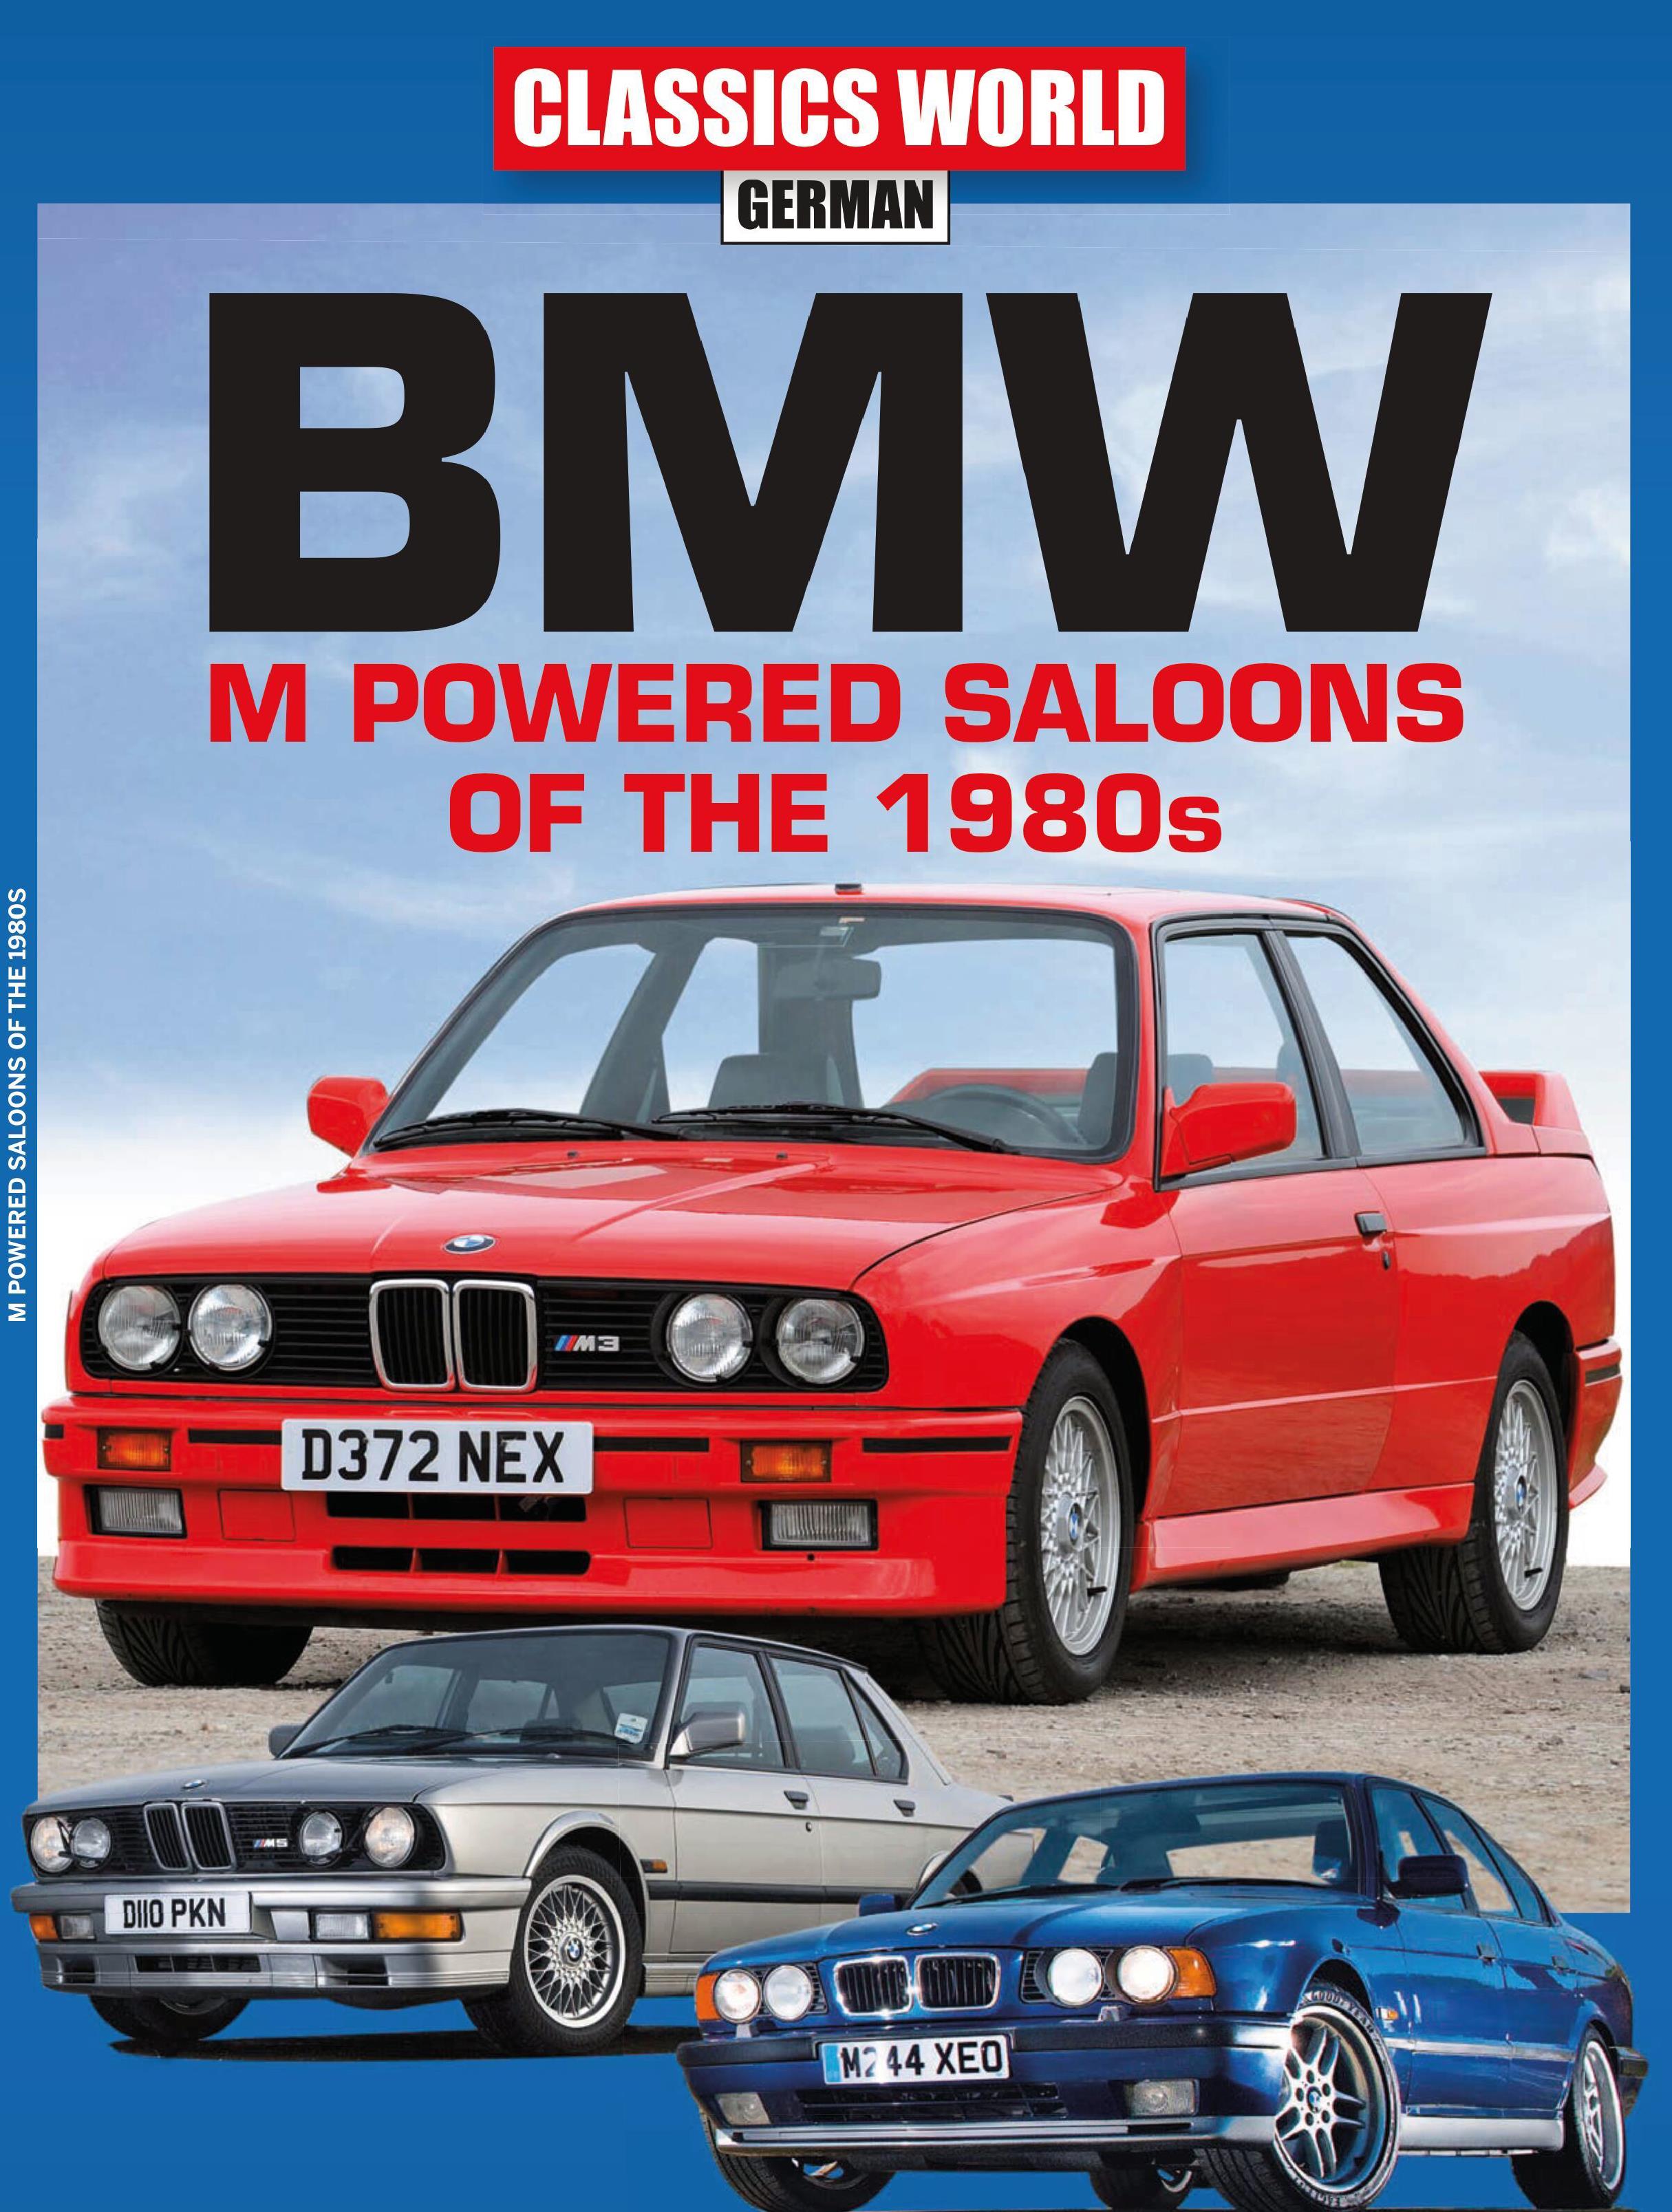 Журнал Classic world: BMW M powered saloons of the 1980's